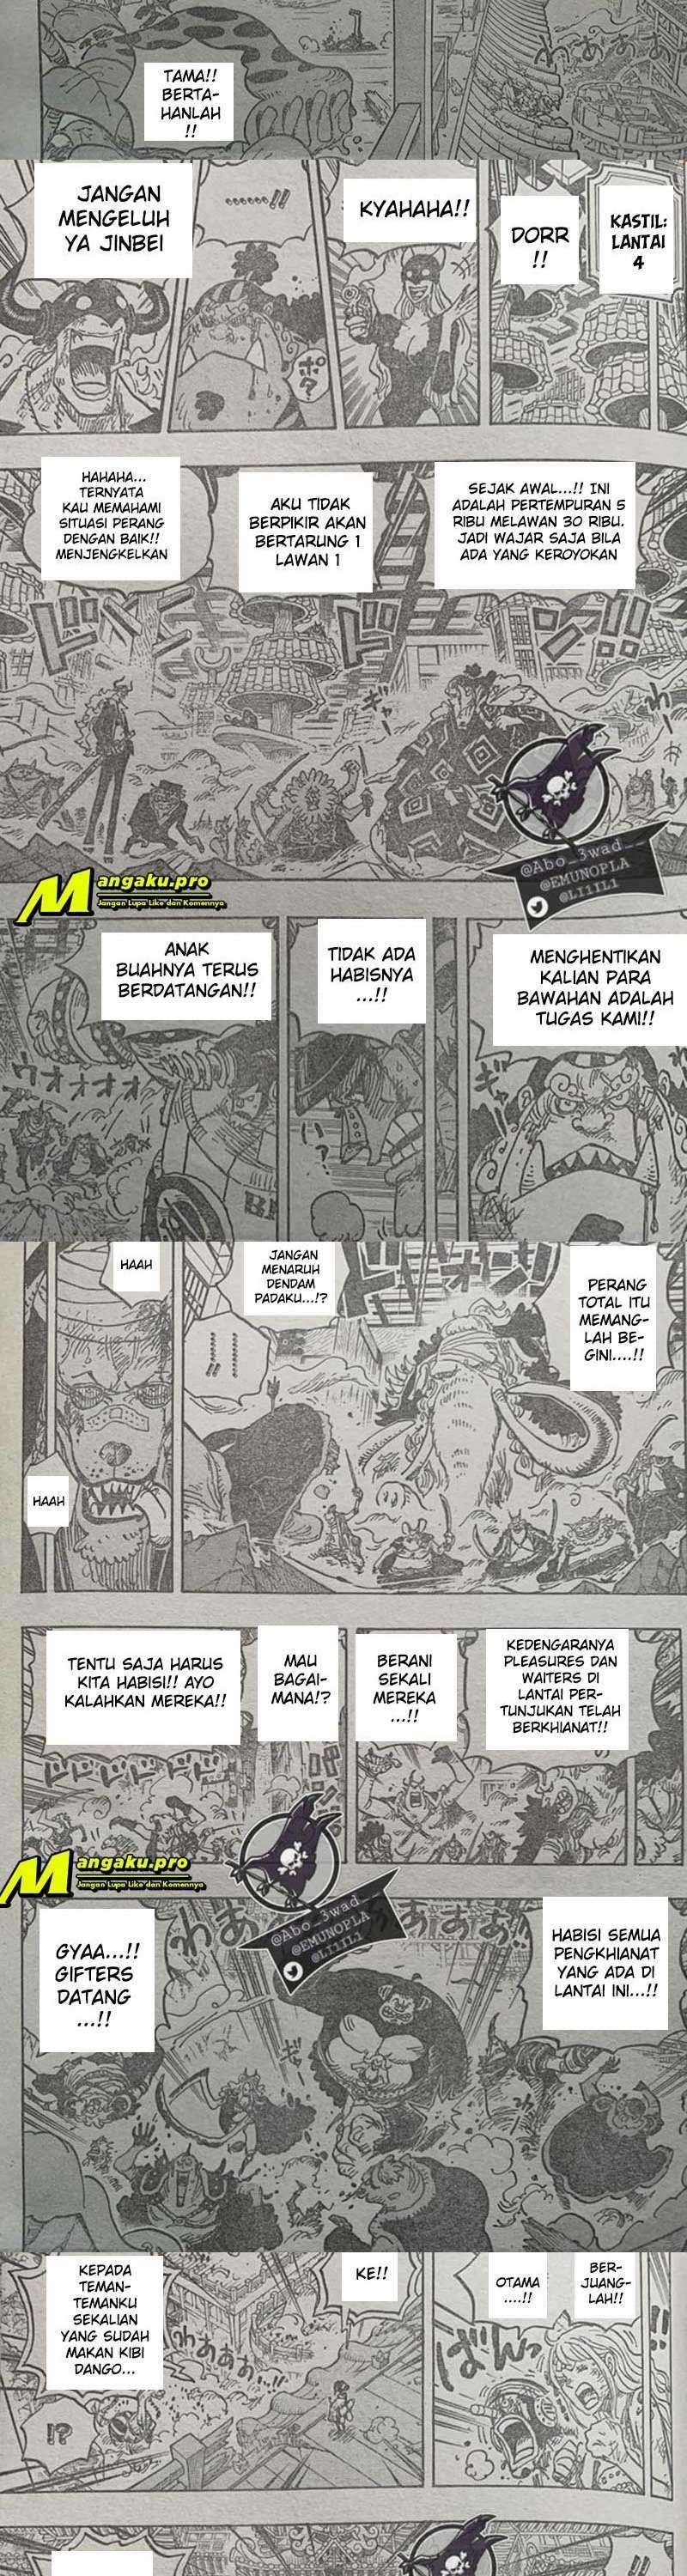 One Piece Chapter 1017 lq Image 1